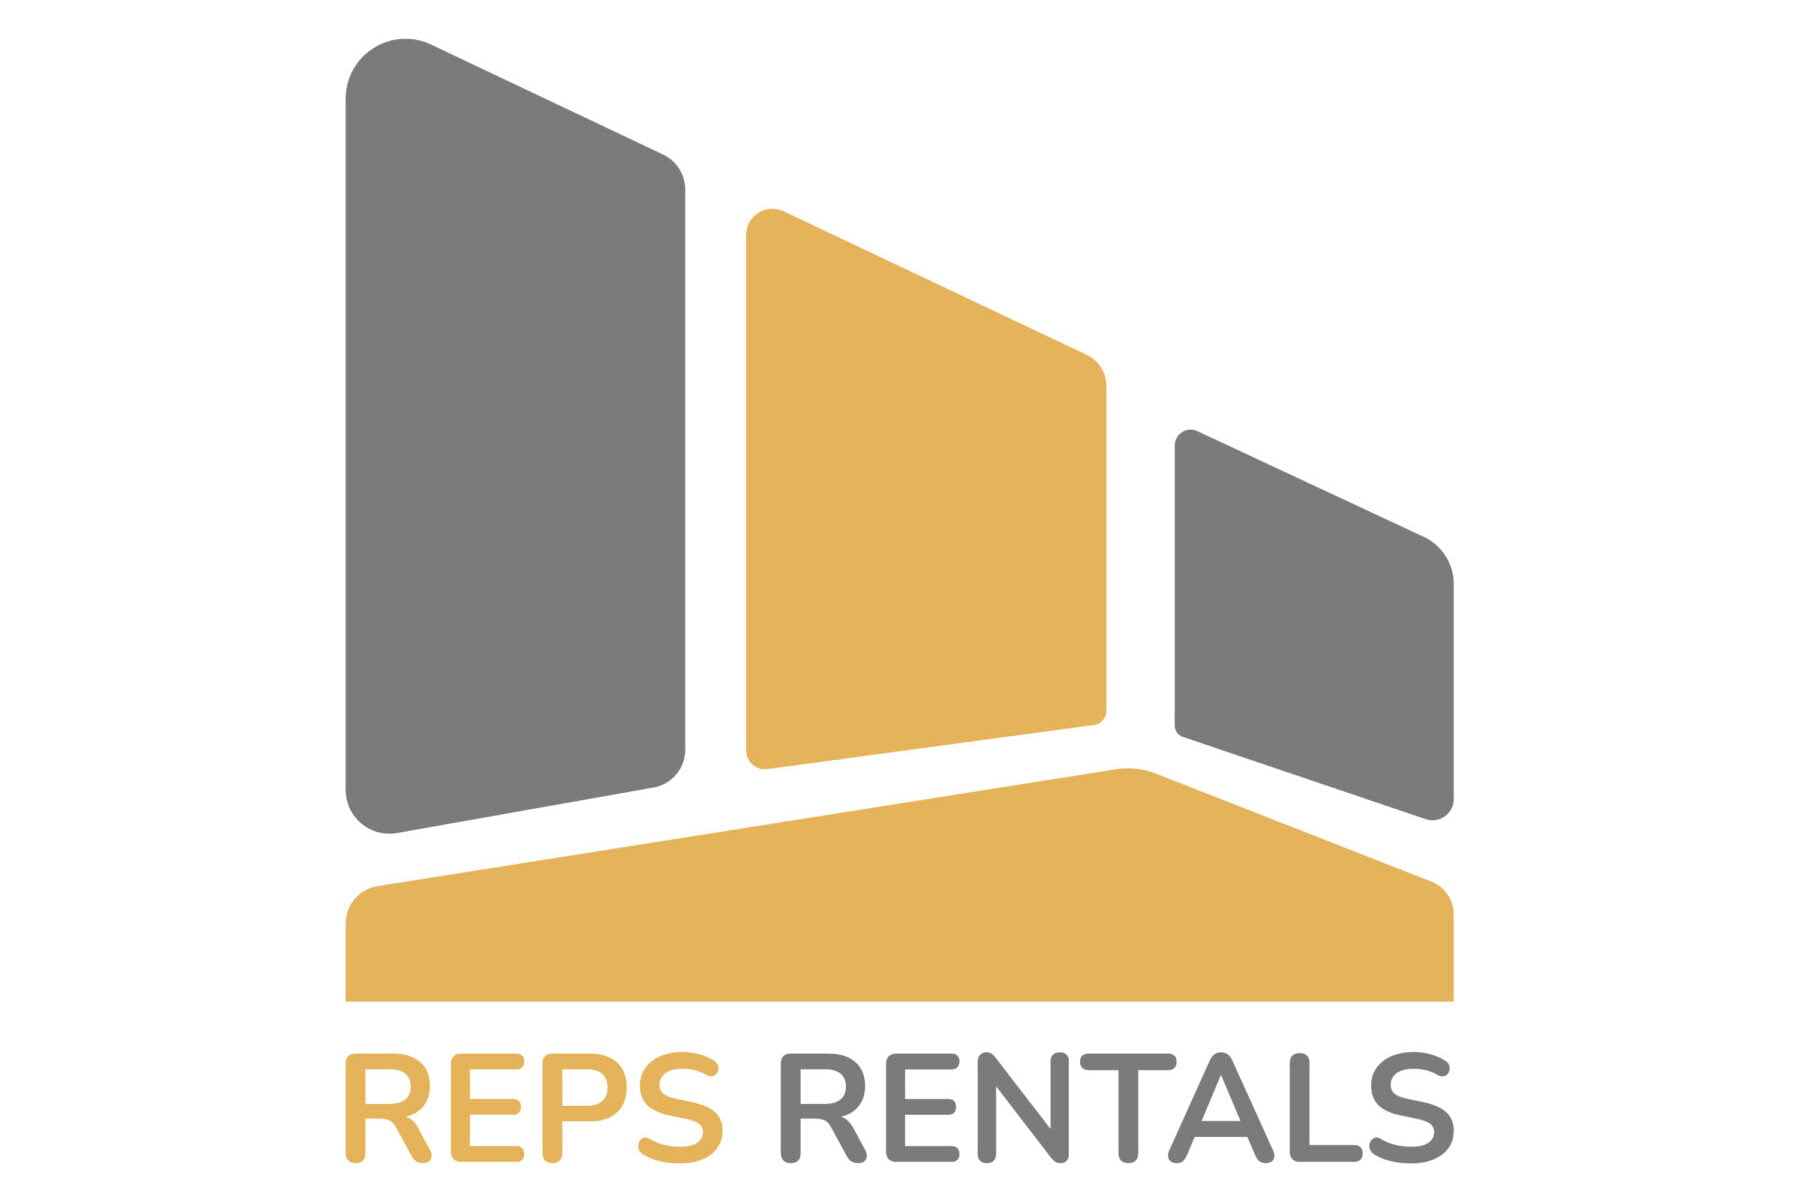 Real Estate Property Services